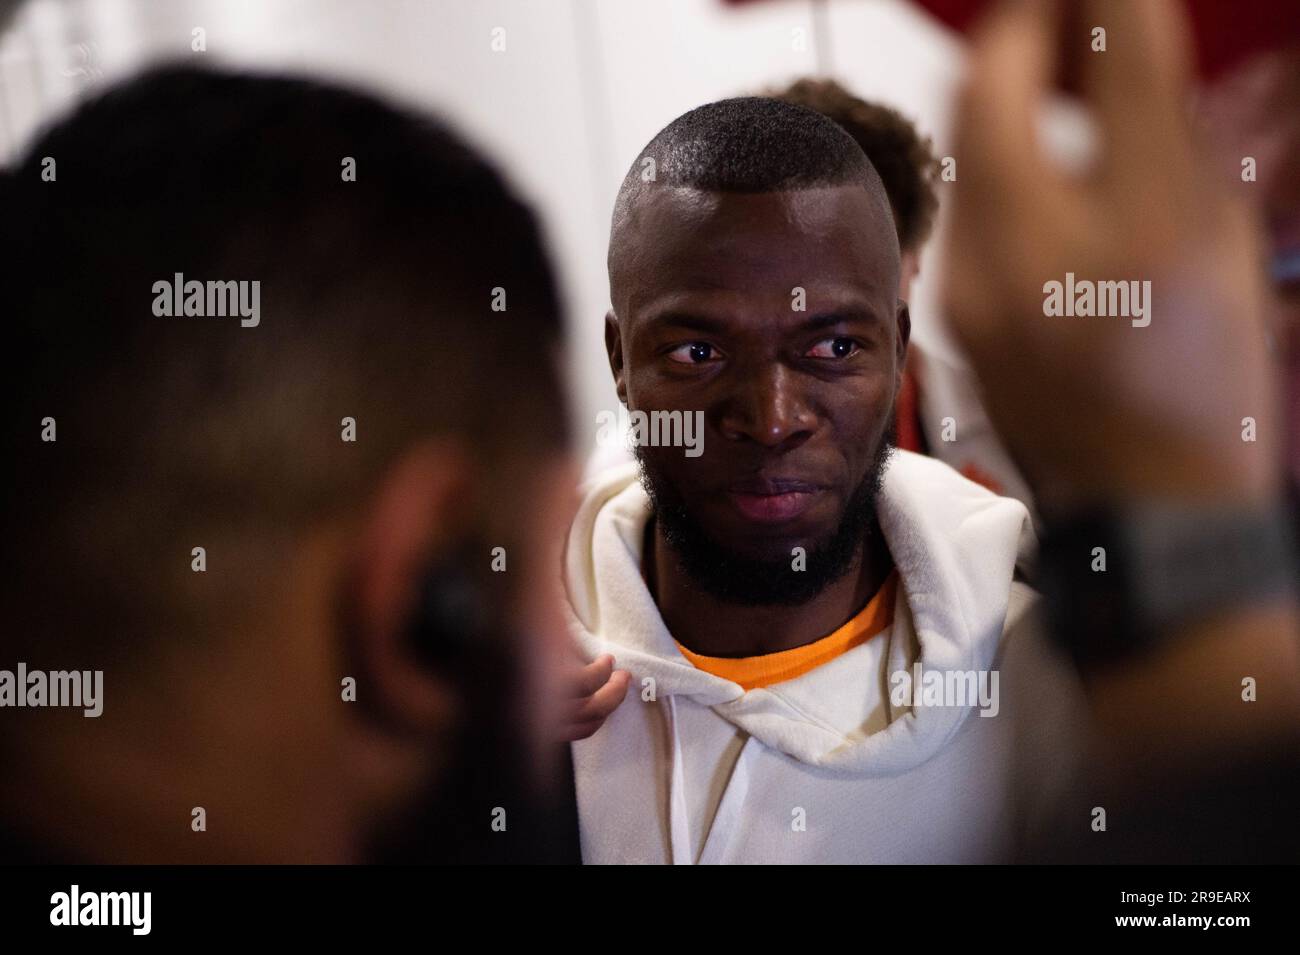 Porto Alegre, Brazil. 26th June, 2023. The Ecuadorian striker Enner Valencia, arrives at Salgado Filho International Airport, in Porto Alegre on the early hours of this Monday, the 26th. The player will be presented as a new signing for Internacional in Porto Alegre on June 26. Photo: Max Peixoto/DiaEsportivo/Alamy Live News Credit: DiaEsportivo/Alamy Live News Stock Photo